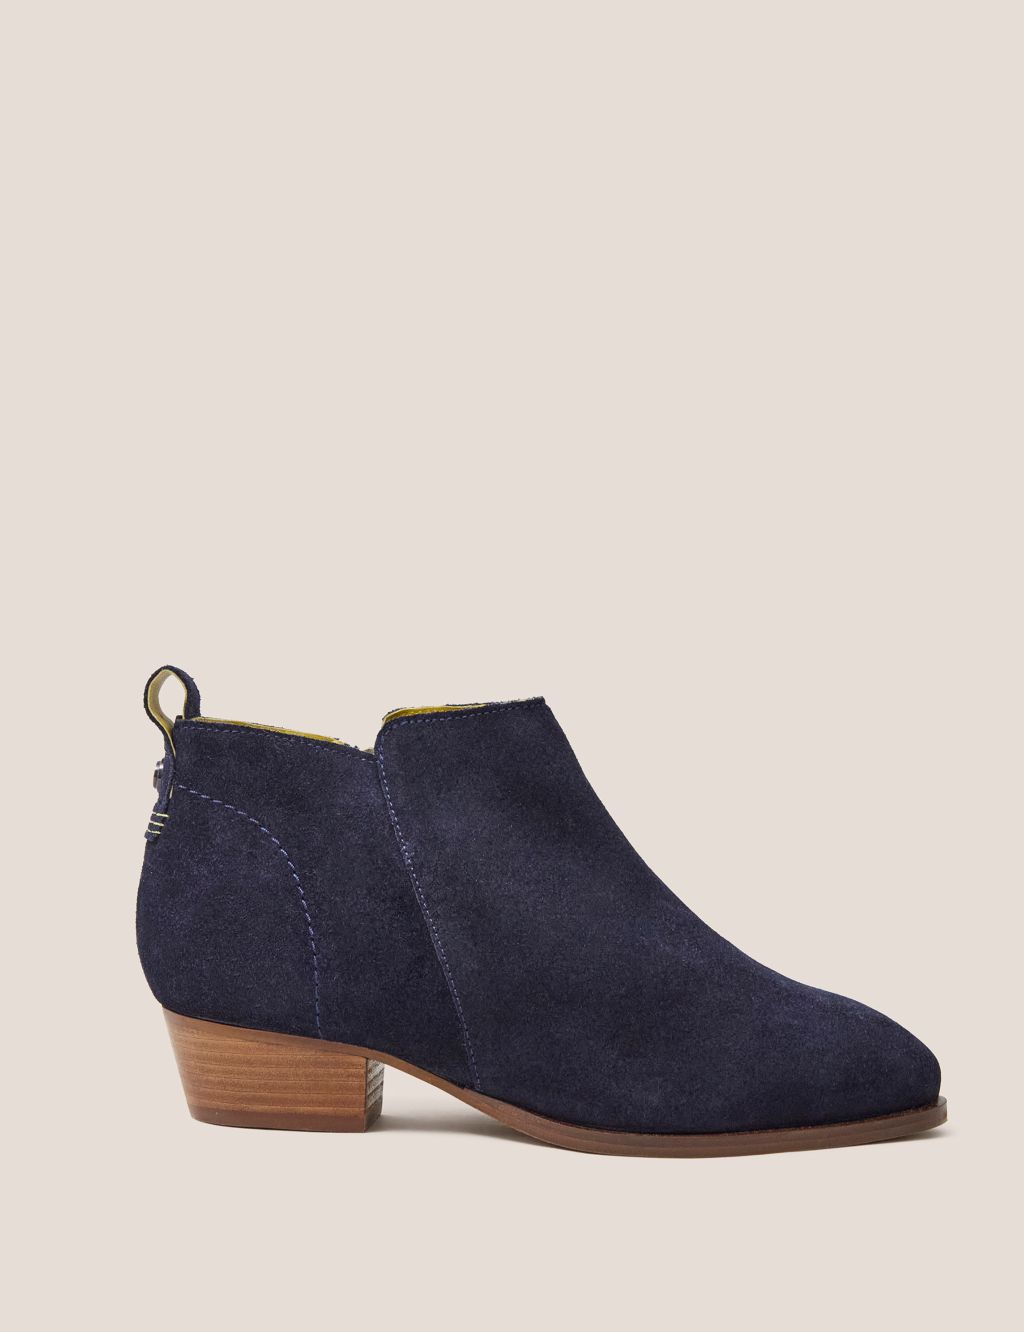 Wide Fit Suede Block Heel Ankle Boots | White Stuff | M&S